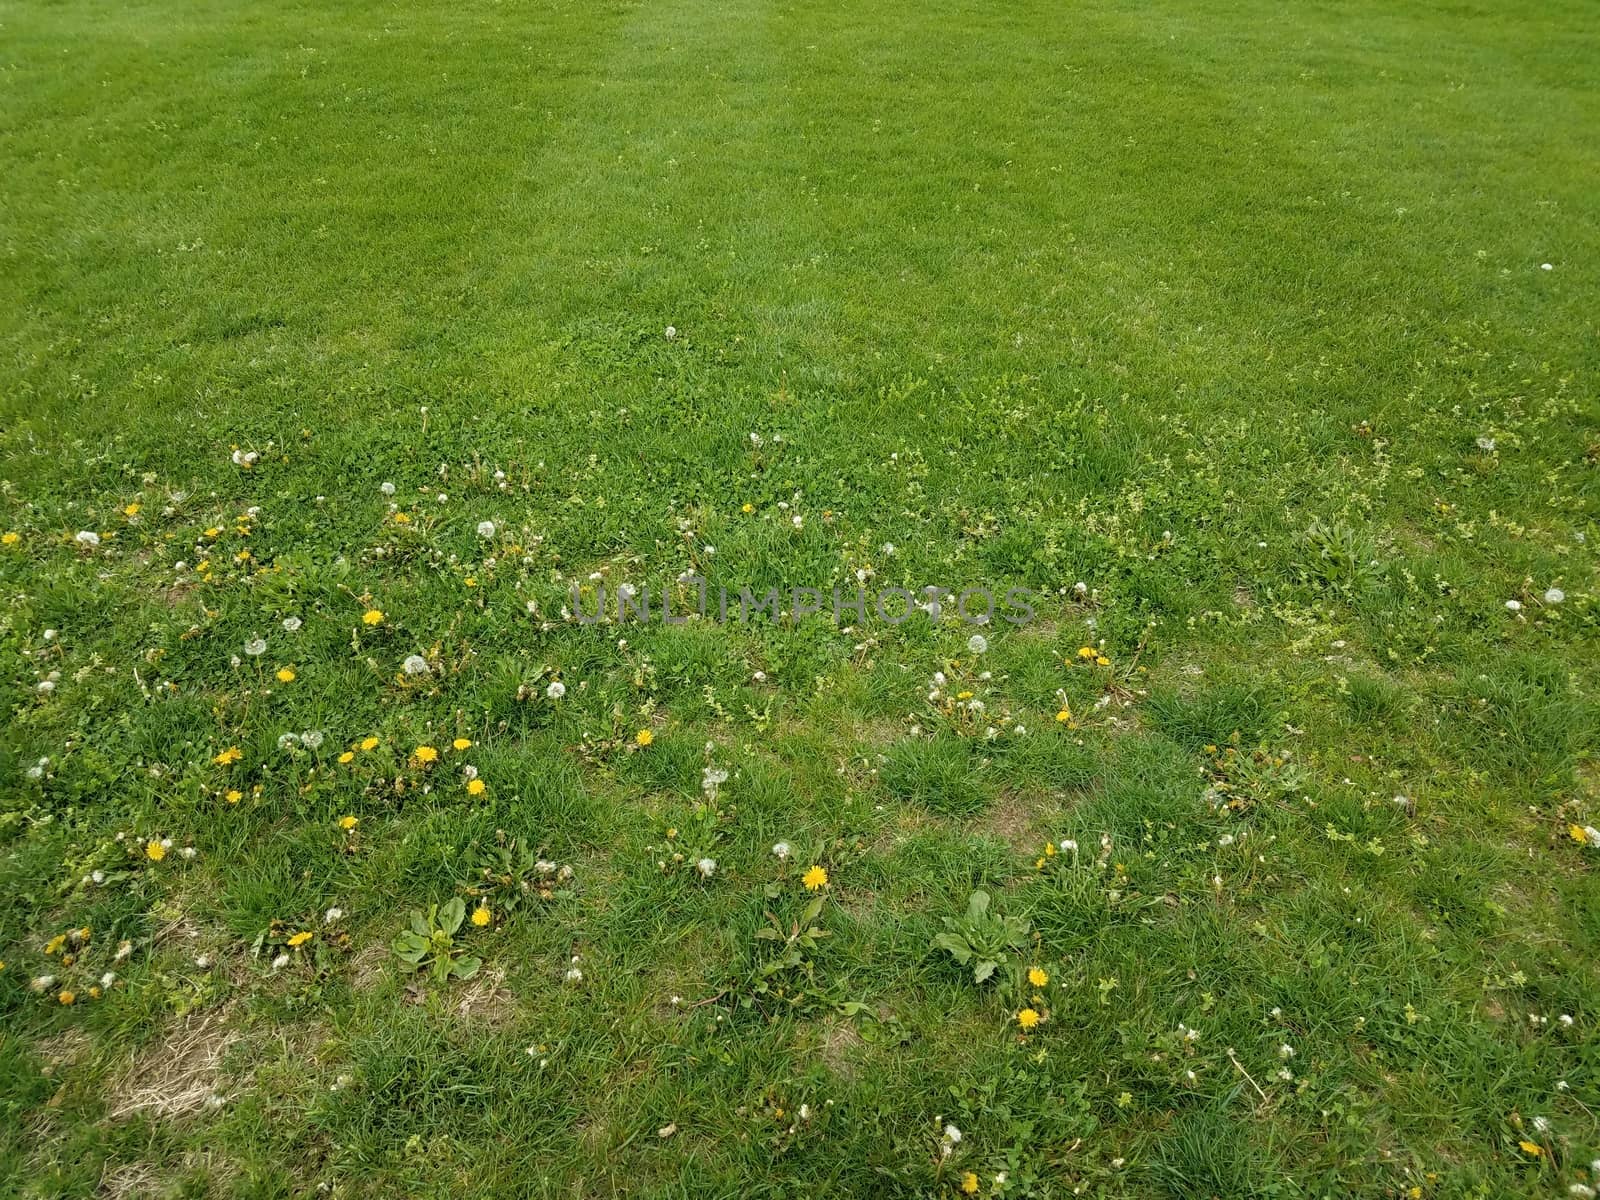 green grass yard or lawn with various weeds and dandelions